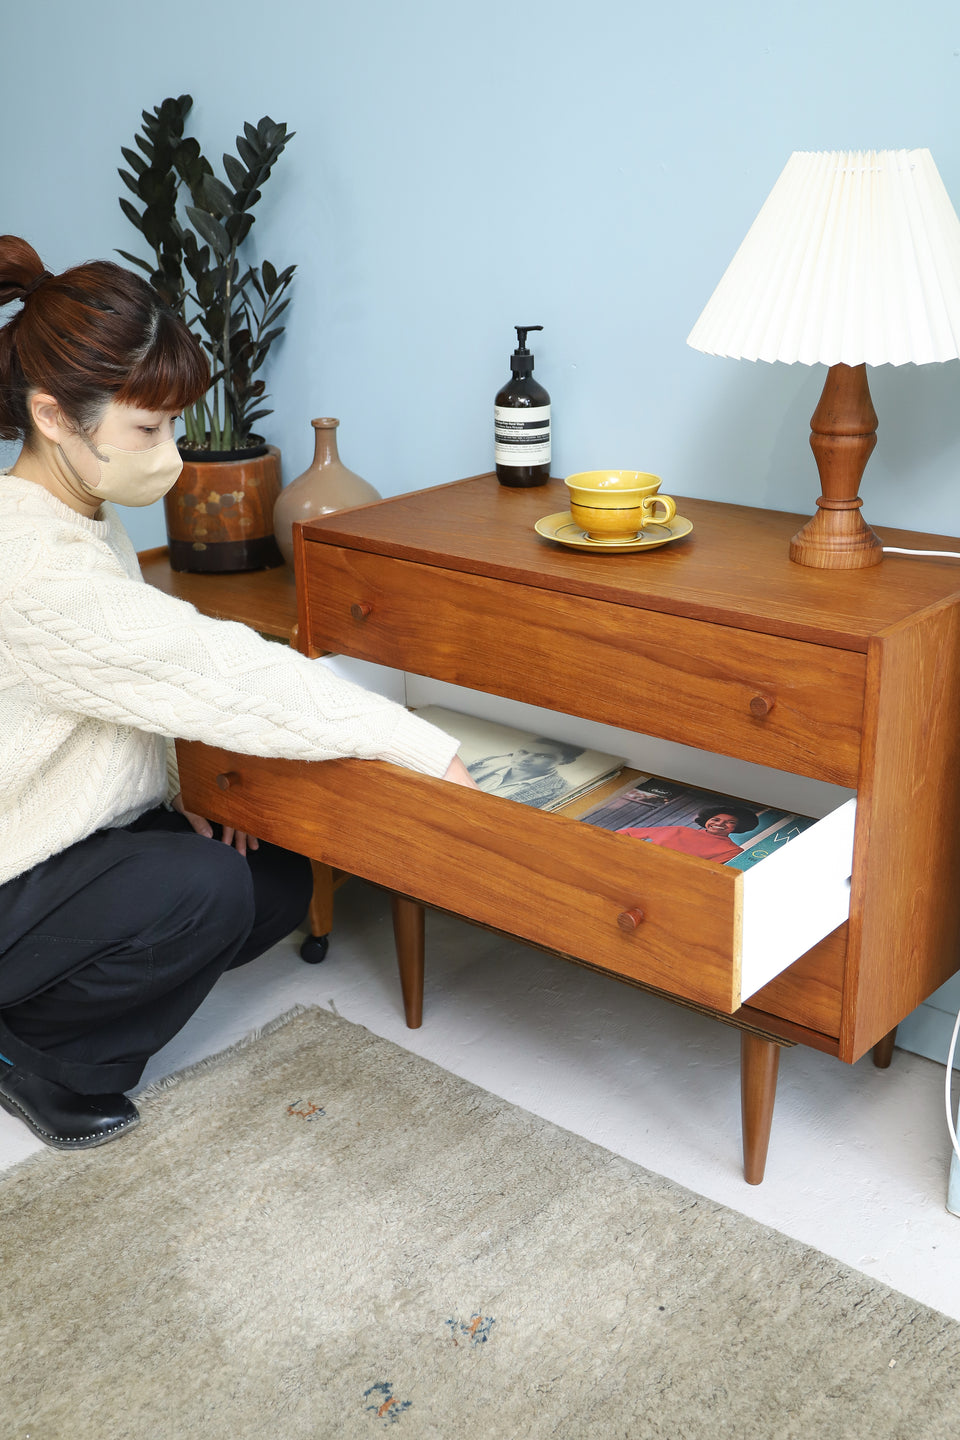 Teakwood Chest 3Drawers Danish Vintage/デンマークヴィンテージ 3段 チェスト チーク材 北欧家具